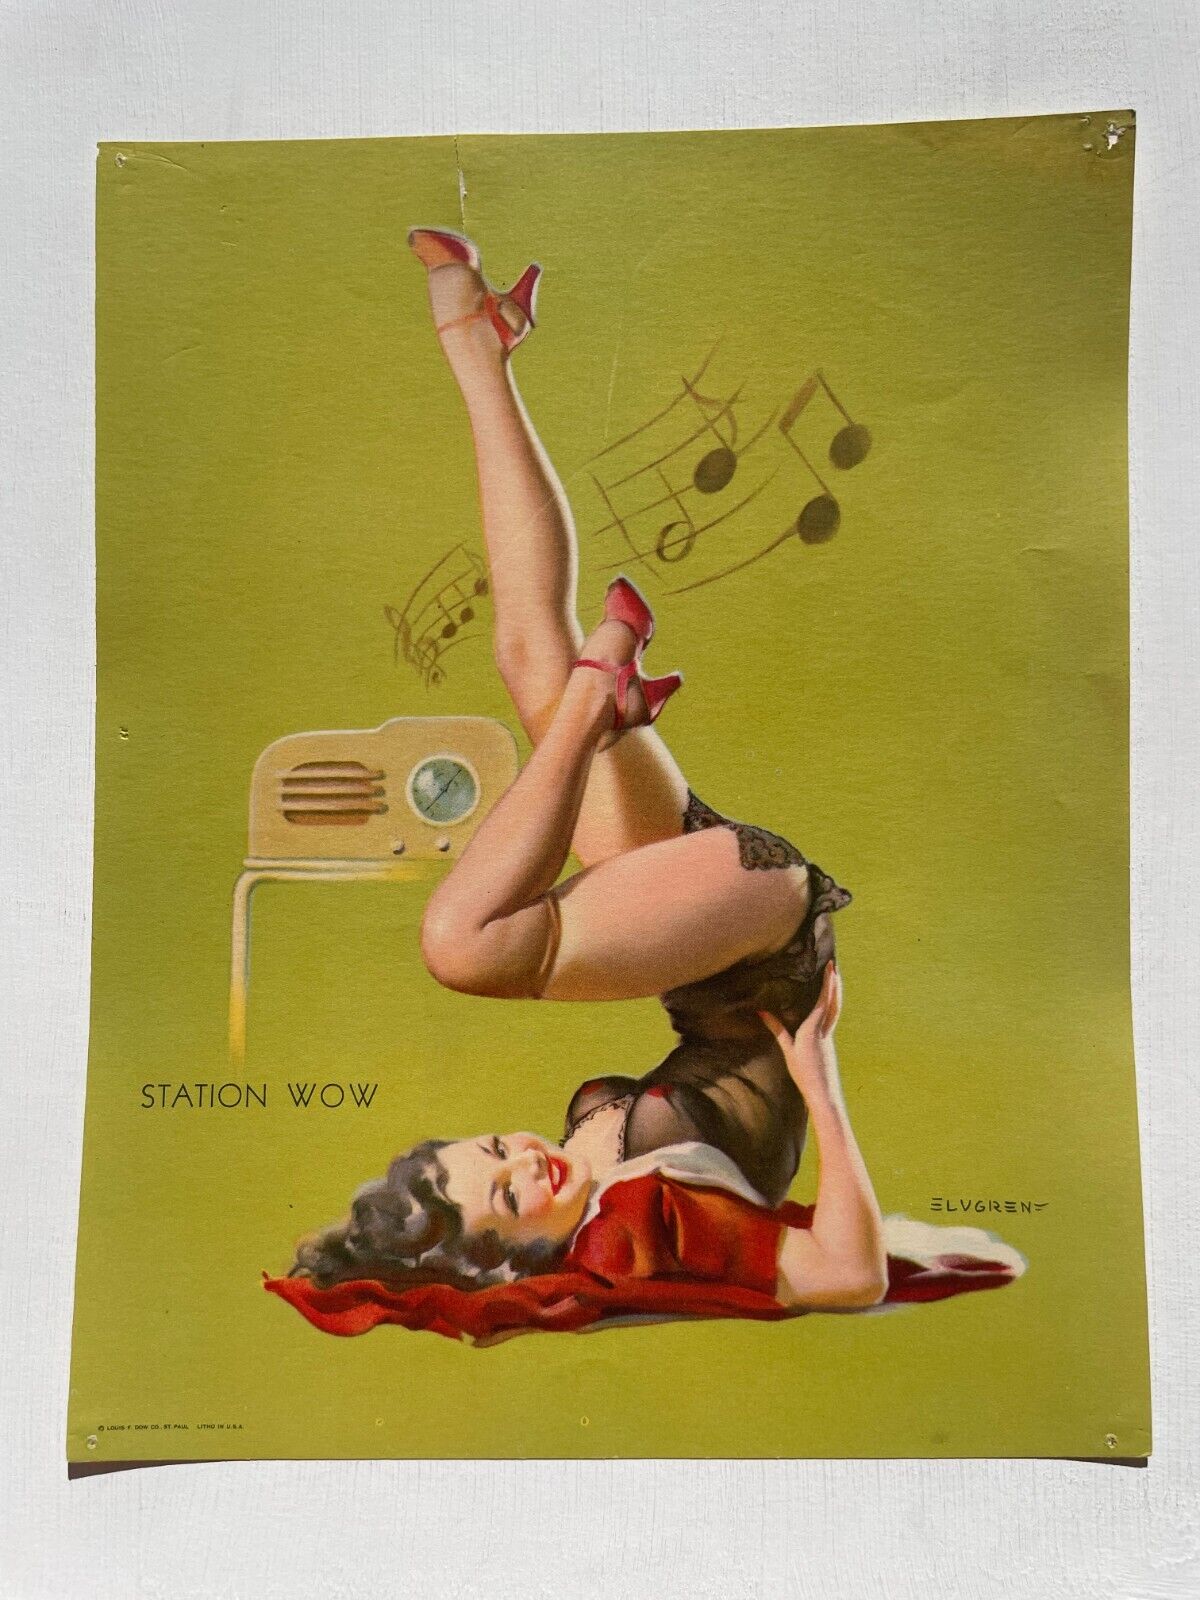 Vintage 1940s Pinup Girl Picture  by Gil Elvgren- Station Wow